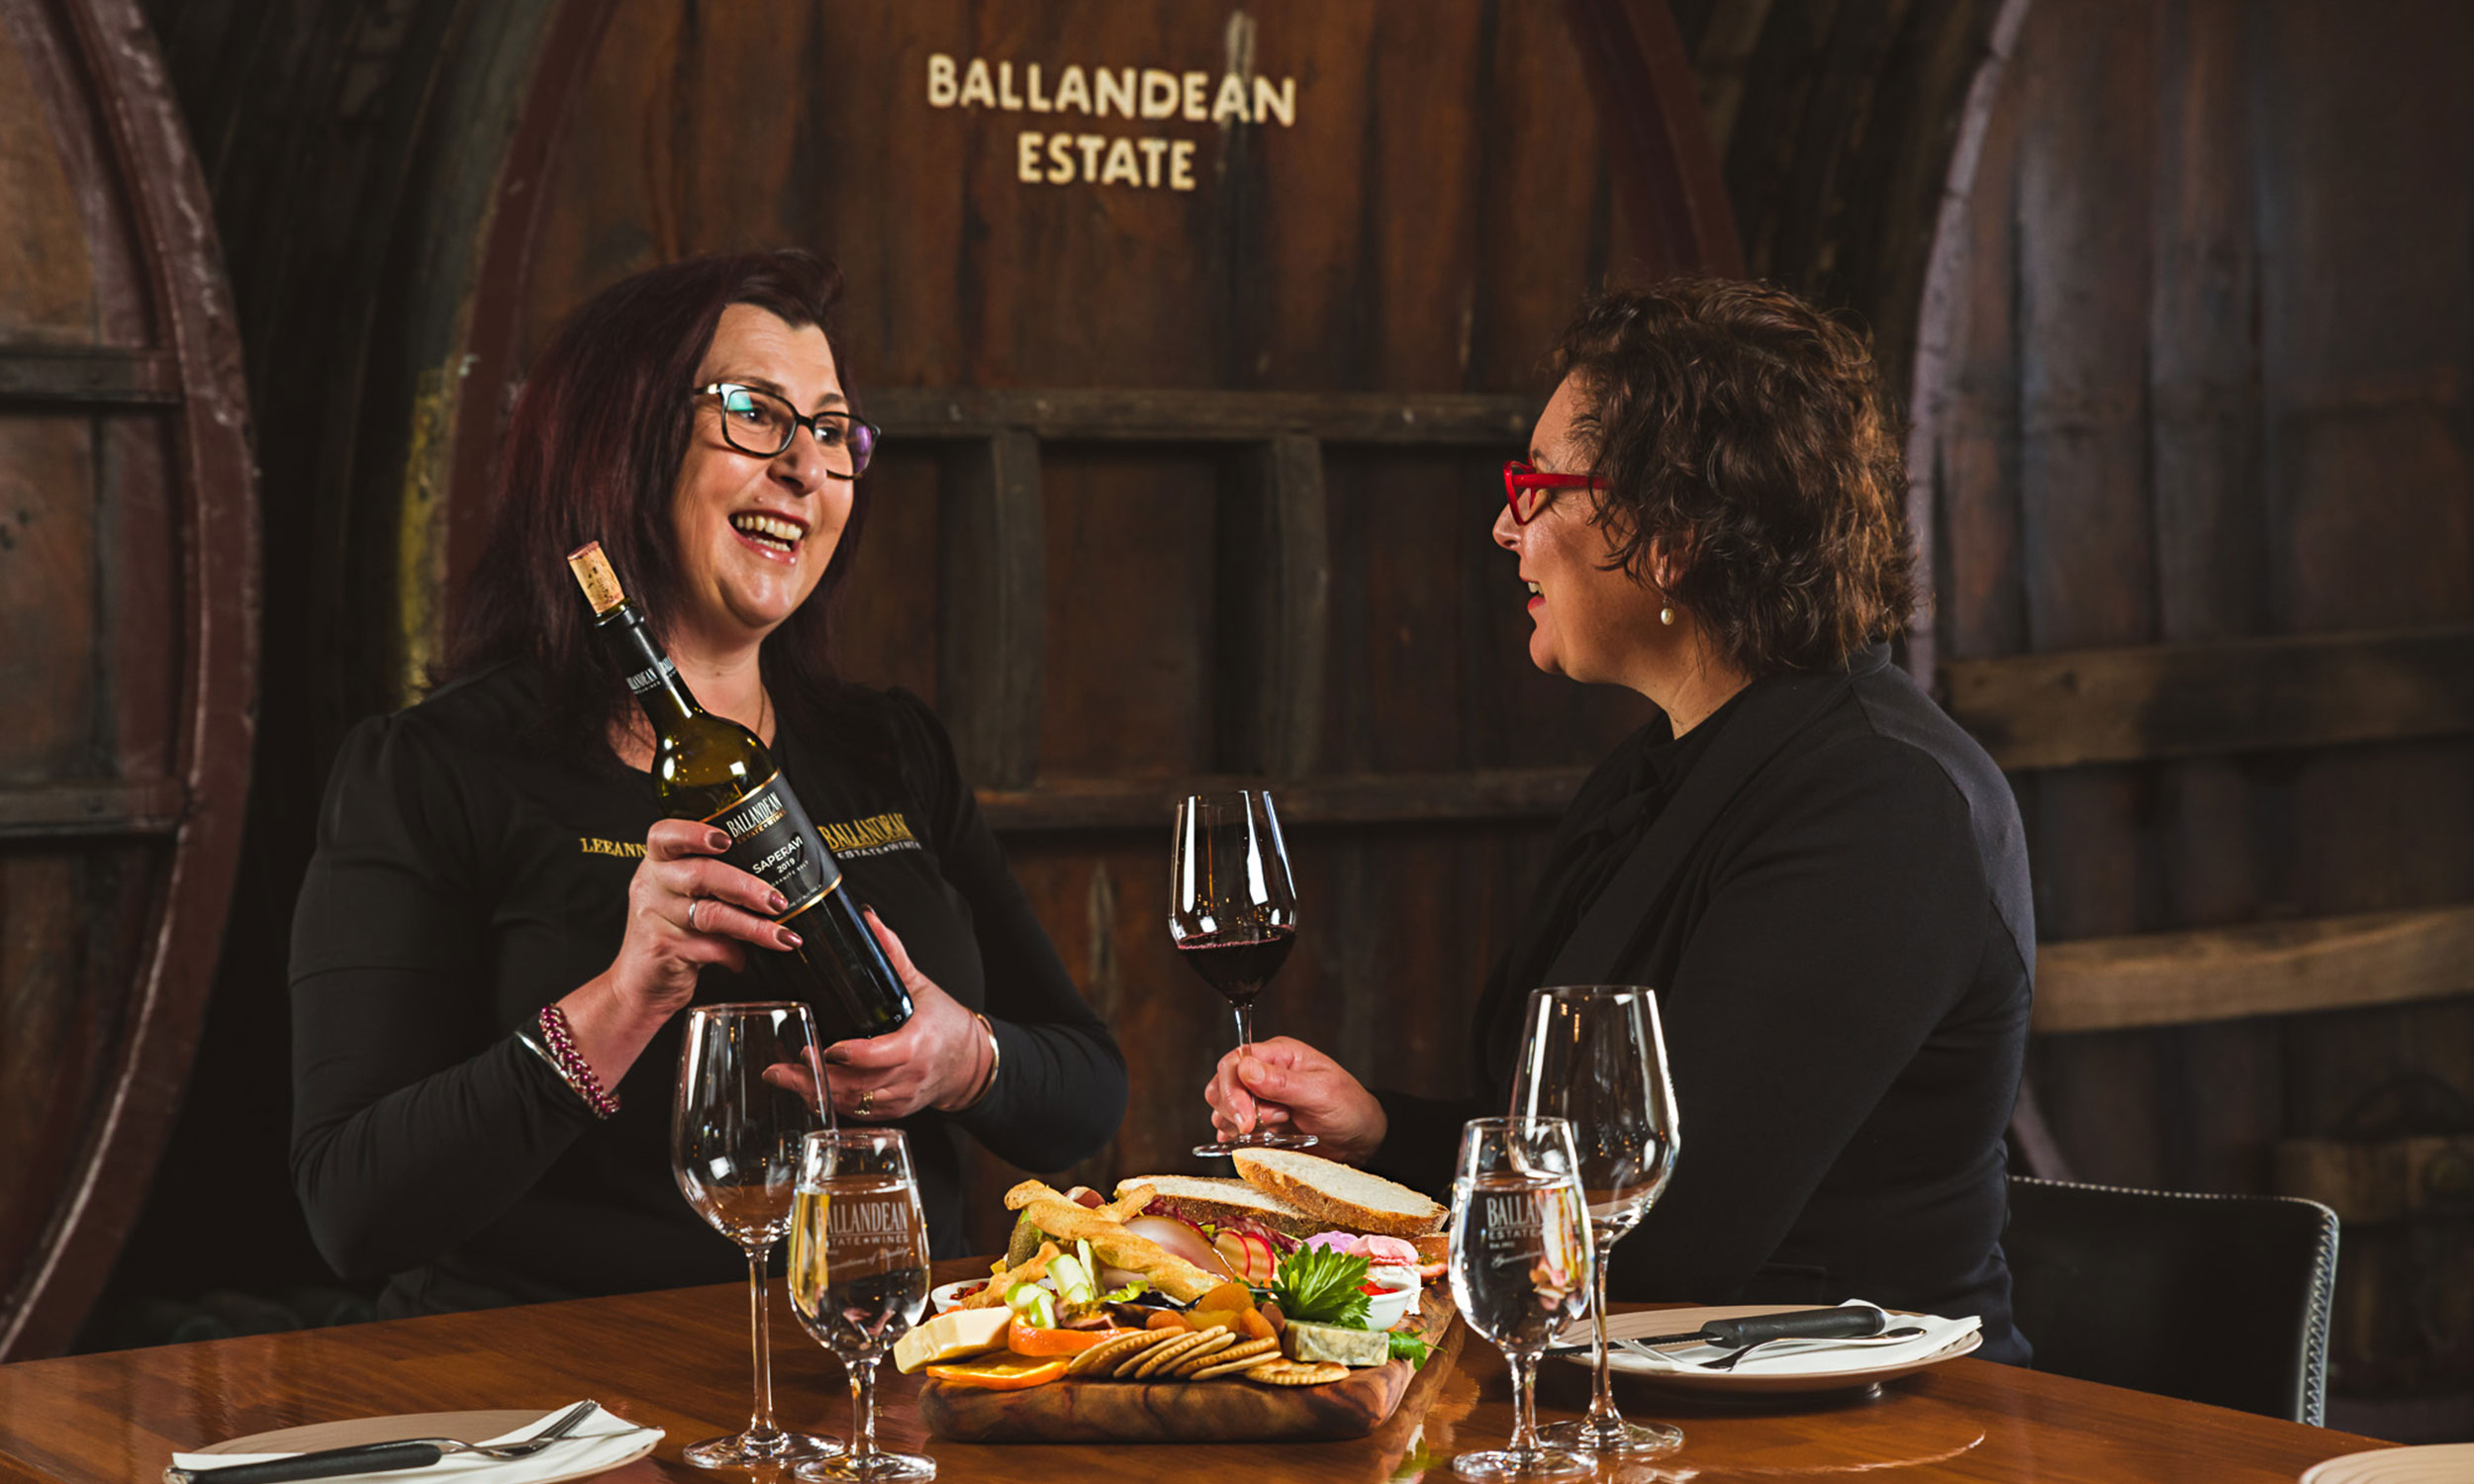 Travellers' Choice awarded to Ballandean Estae. Leeanne and Yvonne in the Barrelroom Wine Lounge.